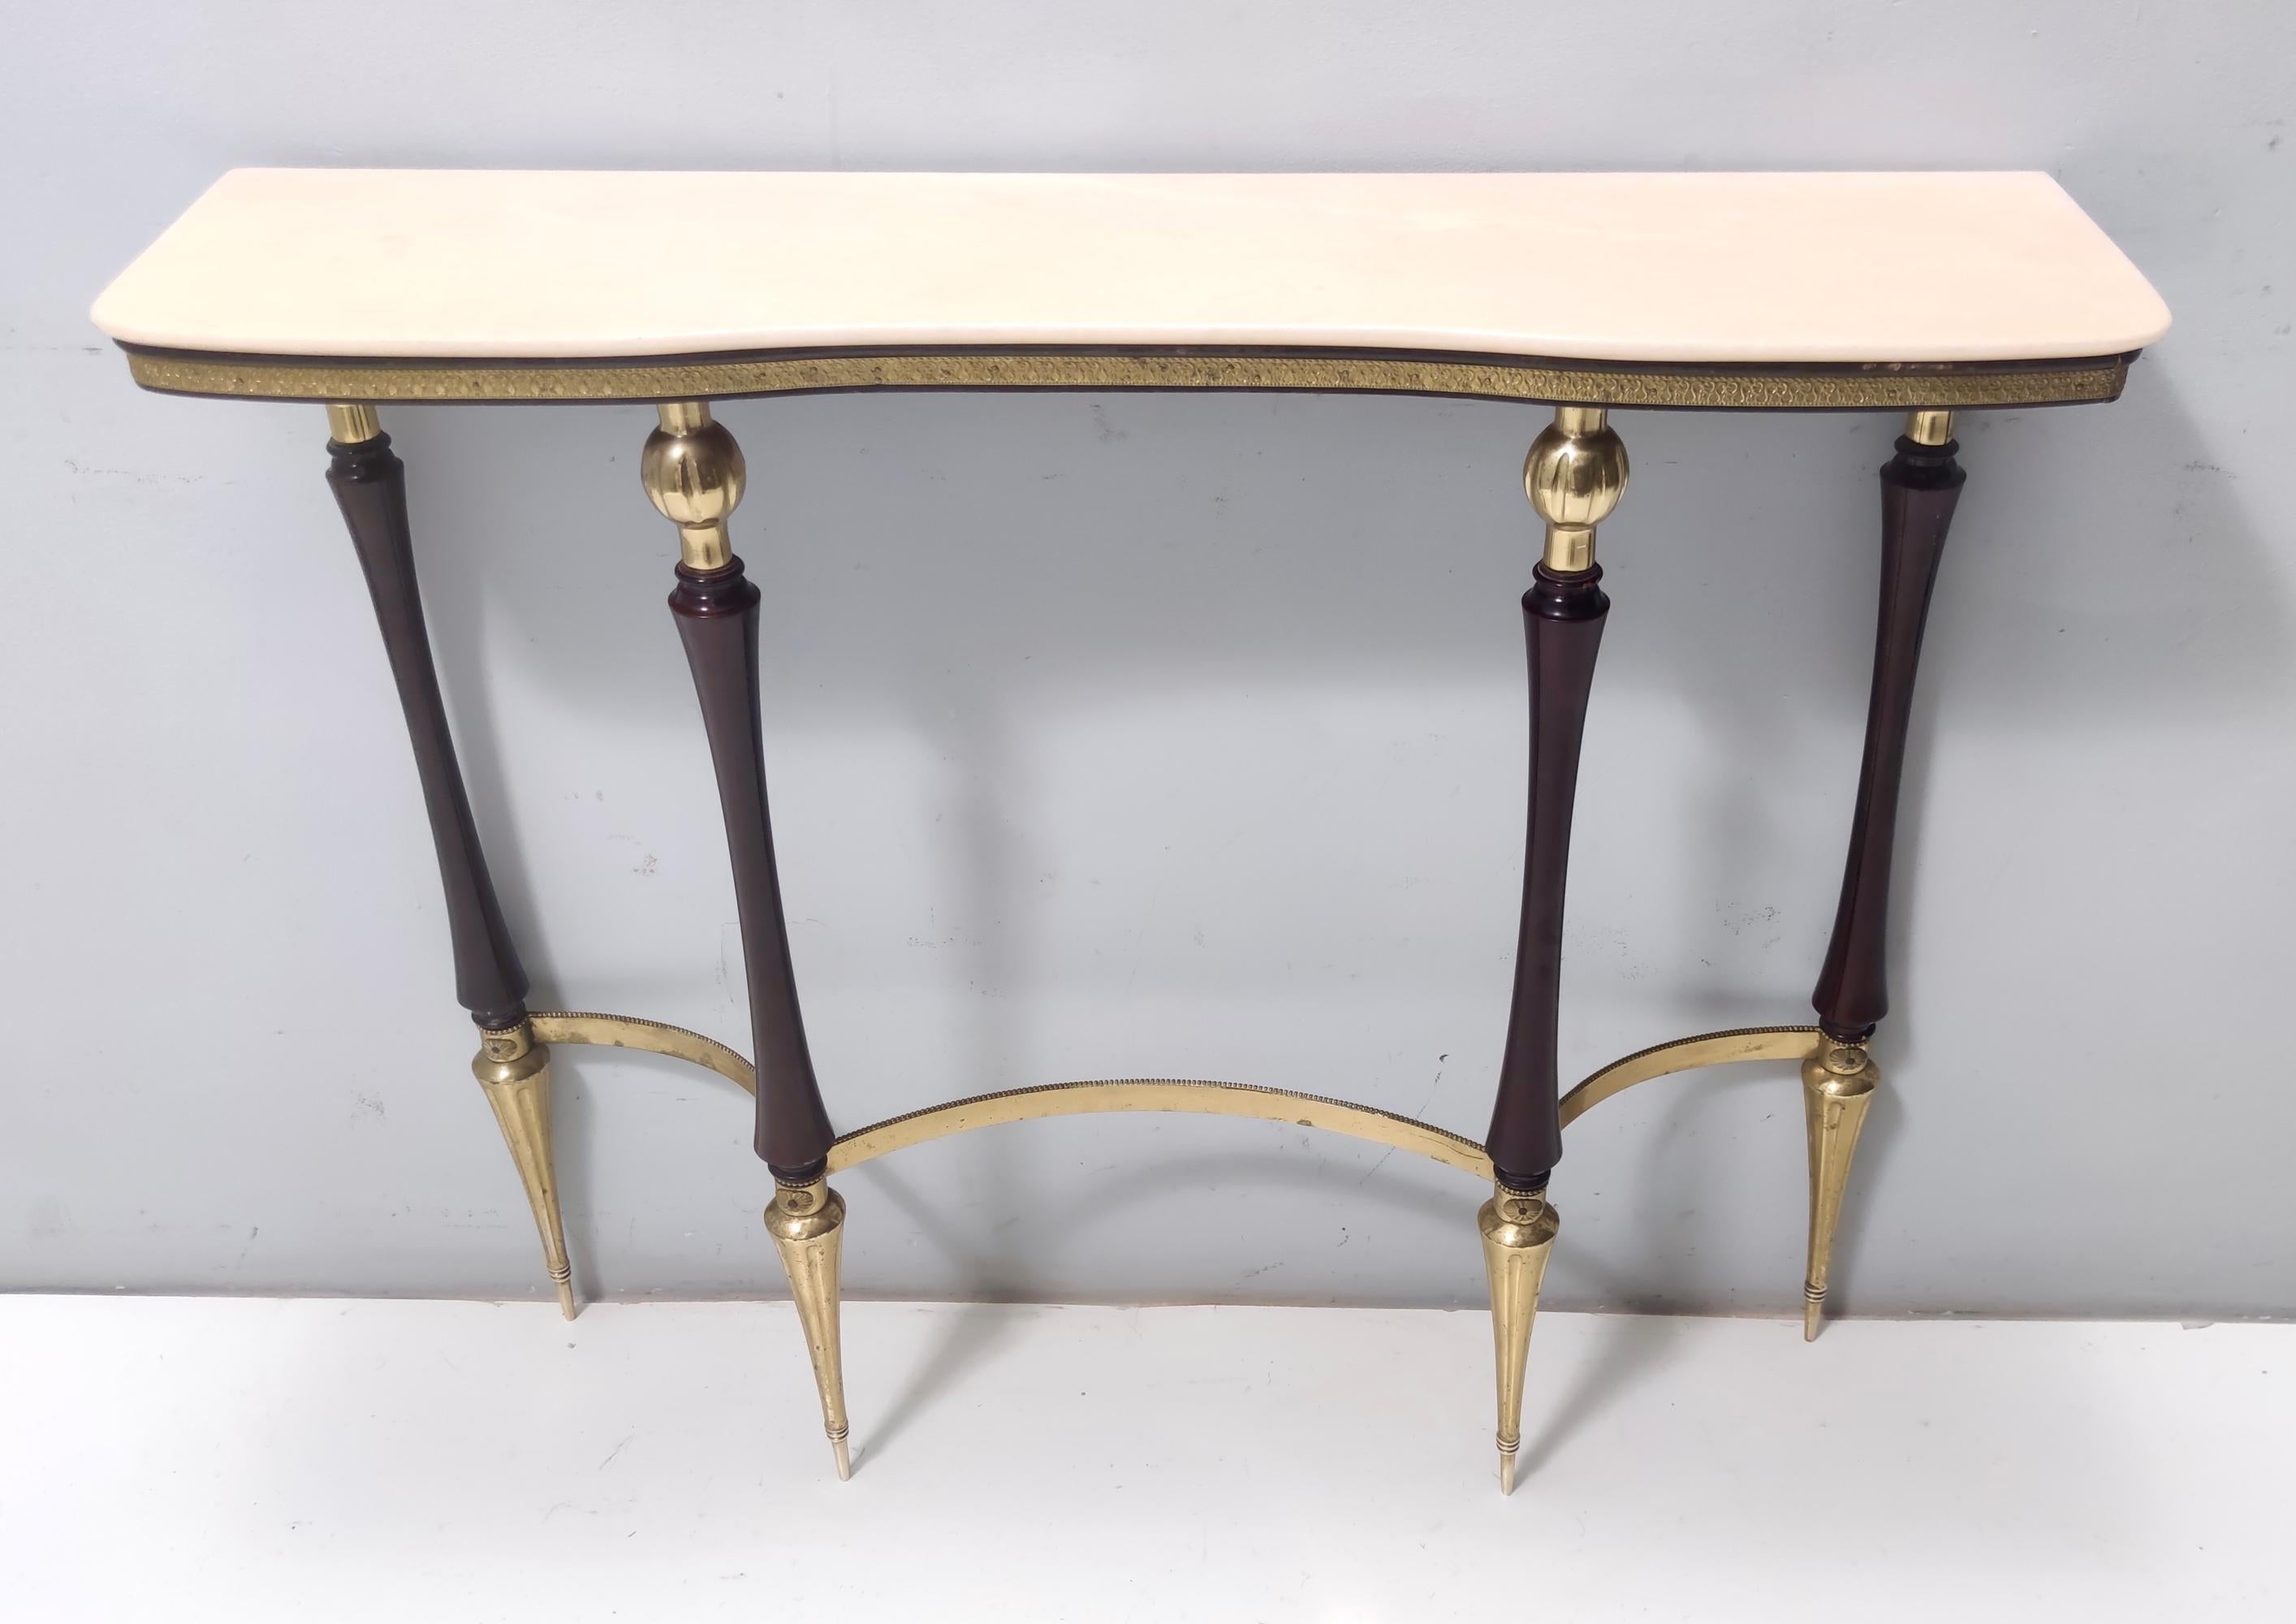 pink console table